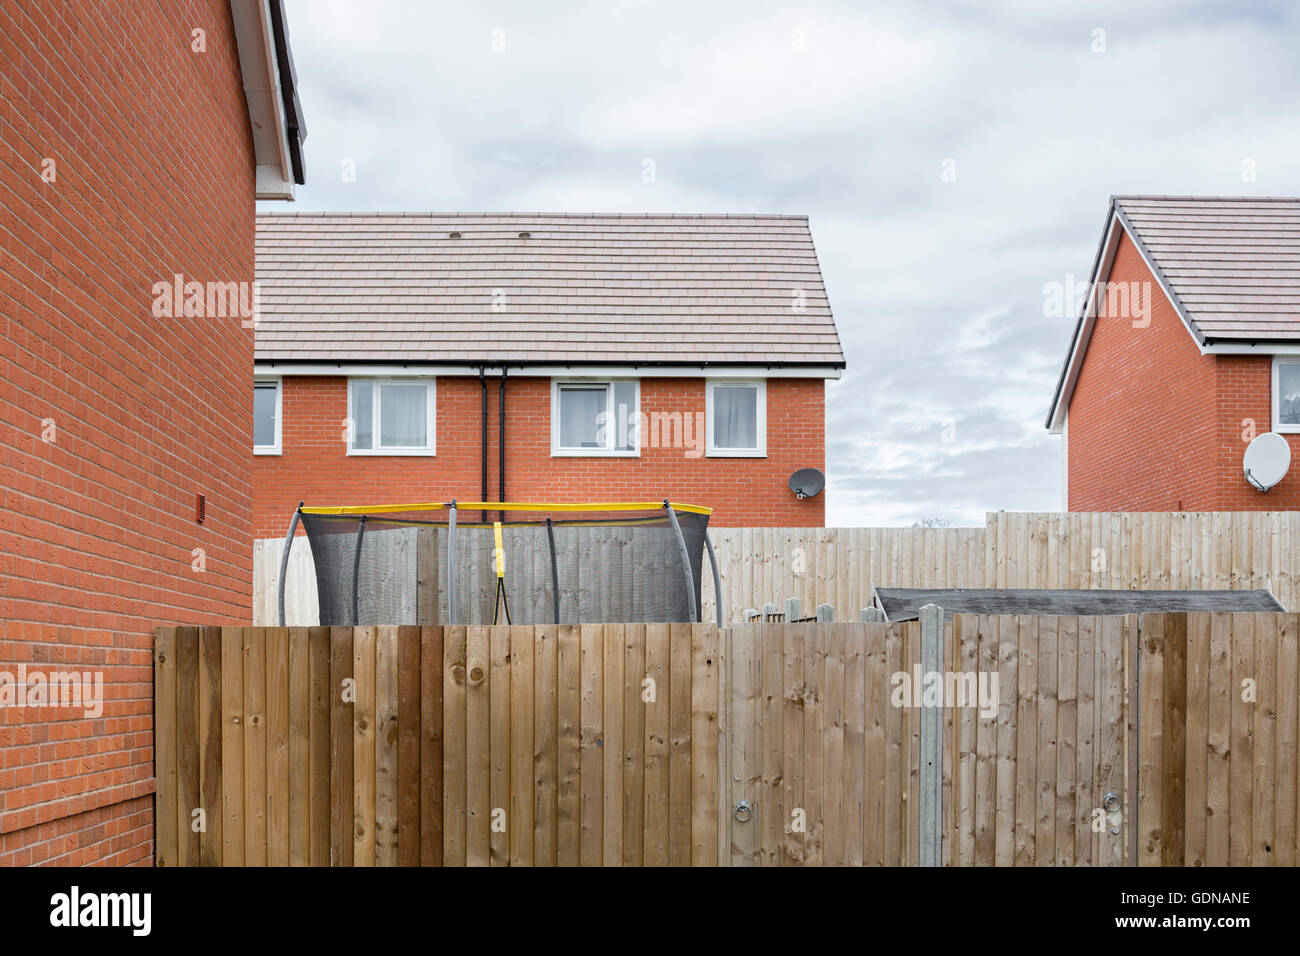 Suburban landscape, Bristol, UK with red brick house on a housing estate and garden with a childs trampoline. Stock Photo